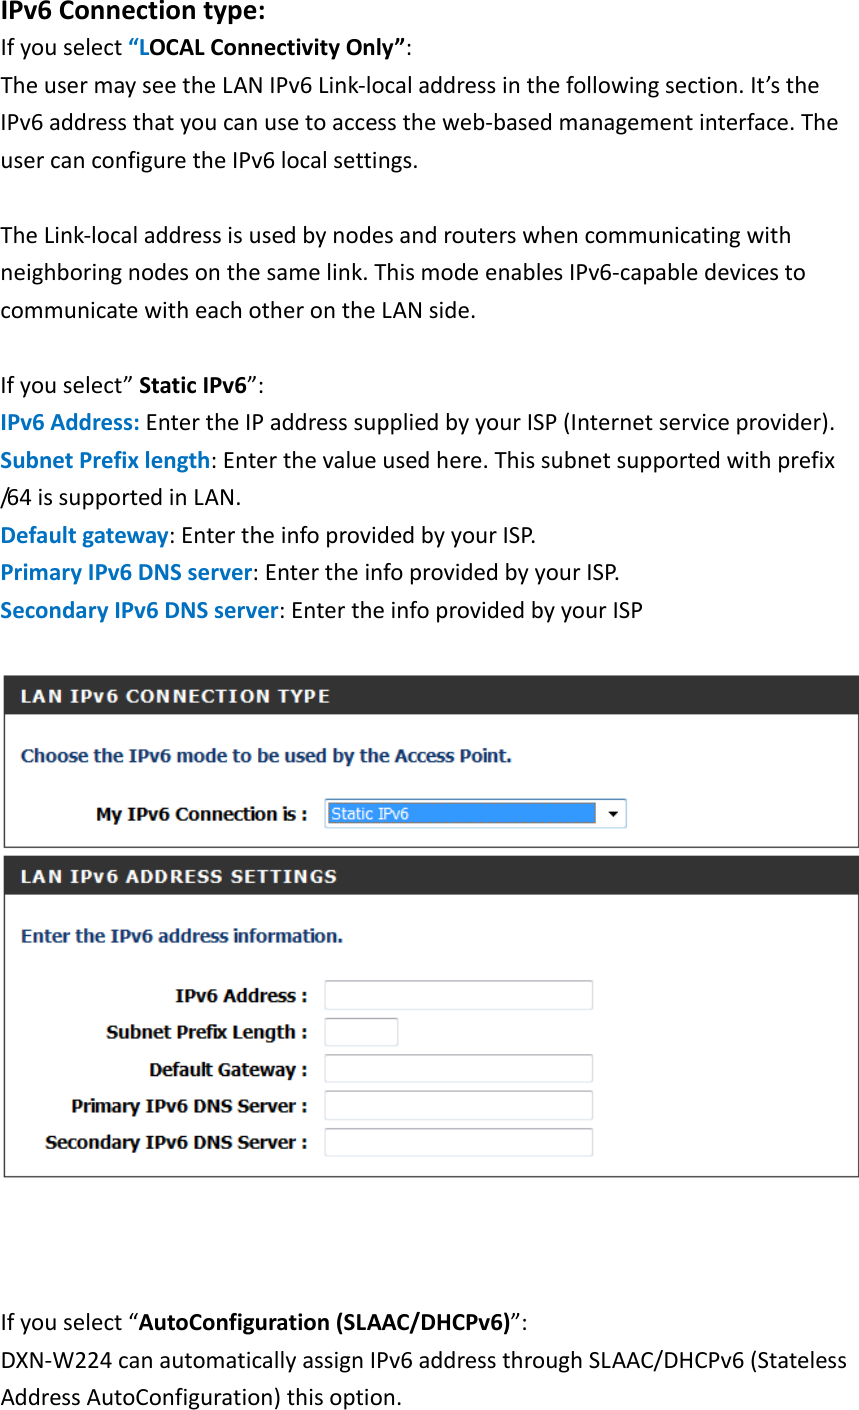   IPv6 Connection type: If you select “LOCAL Connectivity Only”:   The user may see the LAN IPv6 Link-local address in the following section. It’s the IPv6 address that you can use to access the web-based management interface. The user can configure the IPv6 local settings.    The Link-local address is used by nodes and routers when communicating with neighboring nodes on the same link. This mode enables IPv6-capable devices to communicate with each other on the LAN side.  If you select” Static IPv6”:   IPv6 Address: Enter the IP address supplied by your ISP (Internet service provider).   Subnet Prefix length: Enter the value used here. This subnet supported with prefix /64 is supported in LAN.   Default gateway: Enter the info provided by your ISP.   Primary IPv6 DNS server: Enter the info provided by your ISP.   Secondary IPv6 DNS server: Enter the info provided by your ISP      If you select “AutoConfiguration (SLAAC/DHCPv6)”:   DXN-W224 can automatically assign IPv6 address through SLAAC/DHCPv6 (Stateless Address AutoConfiguration) this option.   